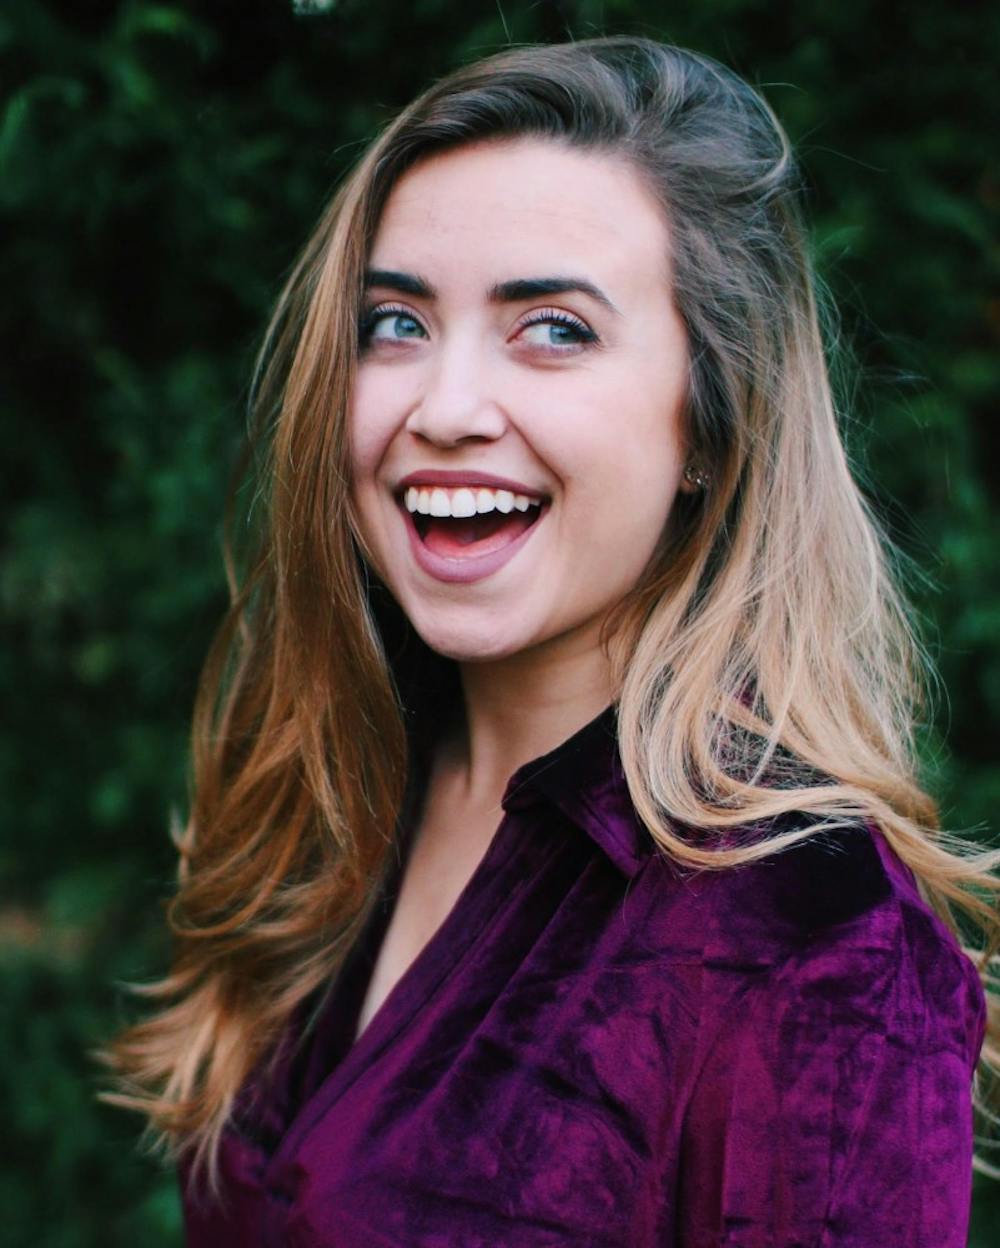 <p>Morgan Yates is a UNC senior who plans on moving to Los Angeles after graduation to continue her professional YouTube career.&nbsp;</p><p>Photo courtesy of Morgan Yates</p>